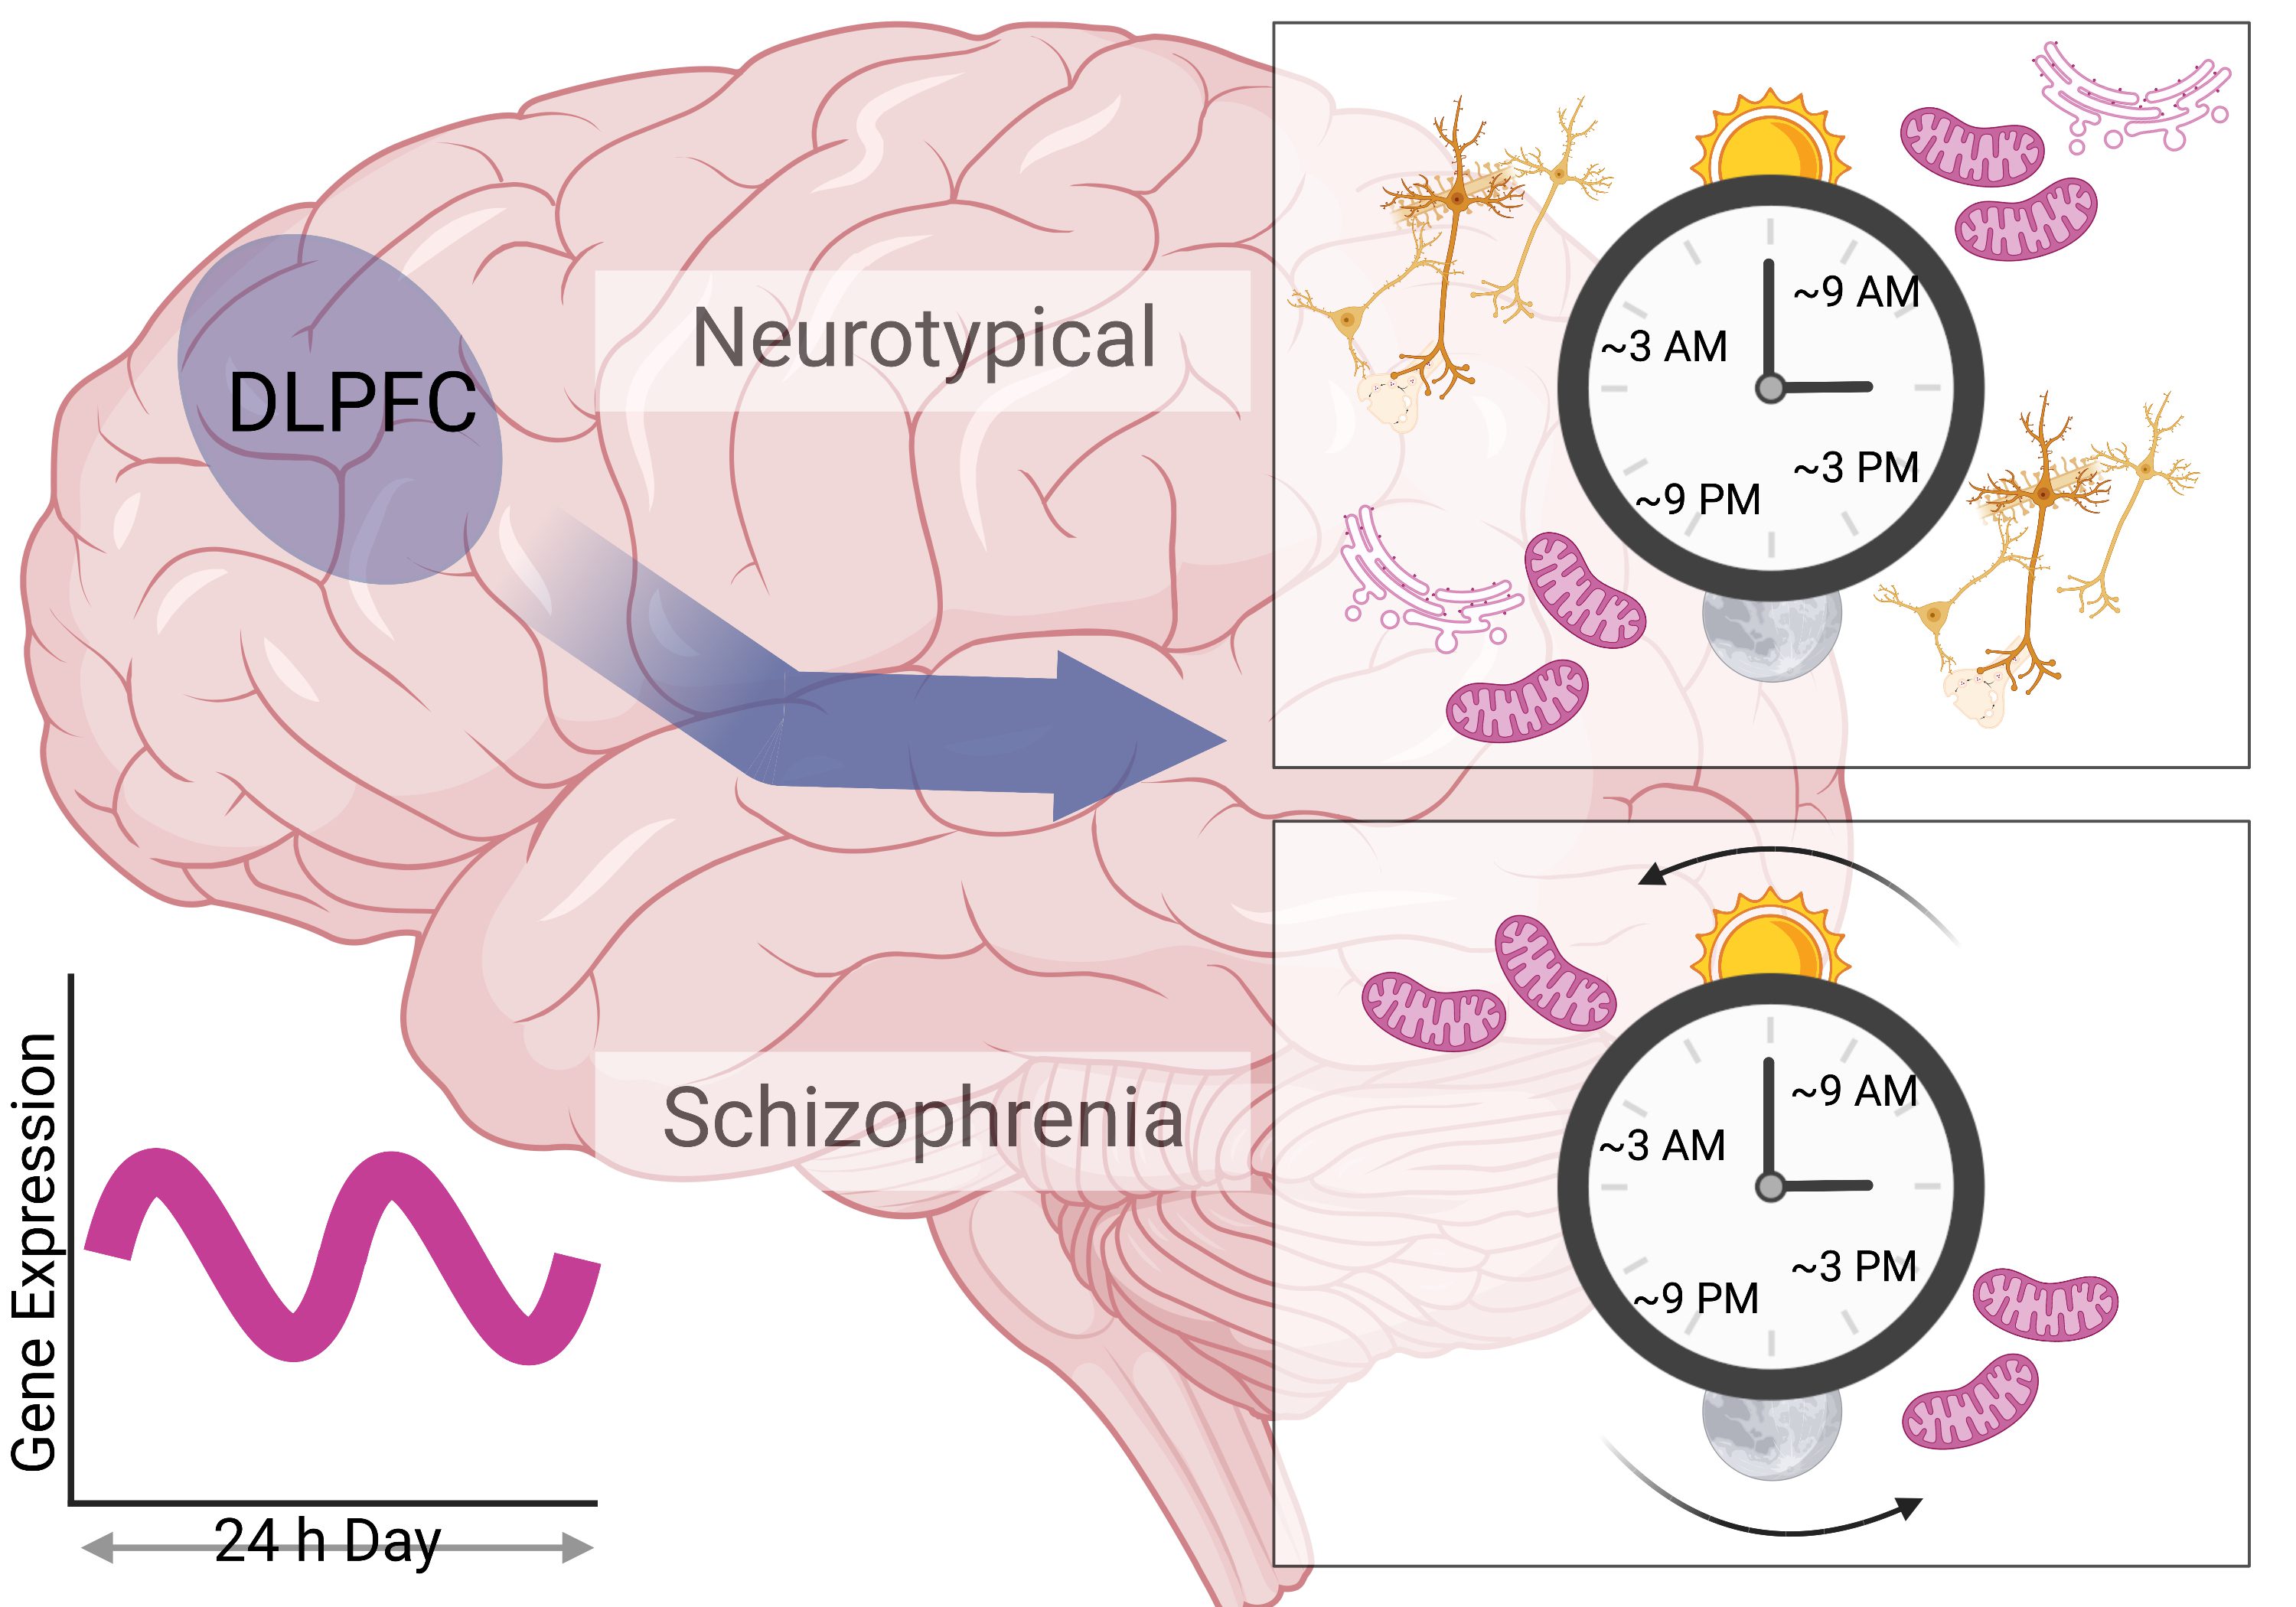 visual representation of alterations in gene expression rhythms in the DLPFC in neurotypical vs schizophrenic brains